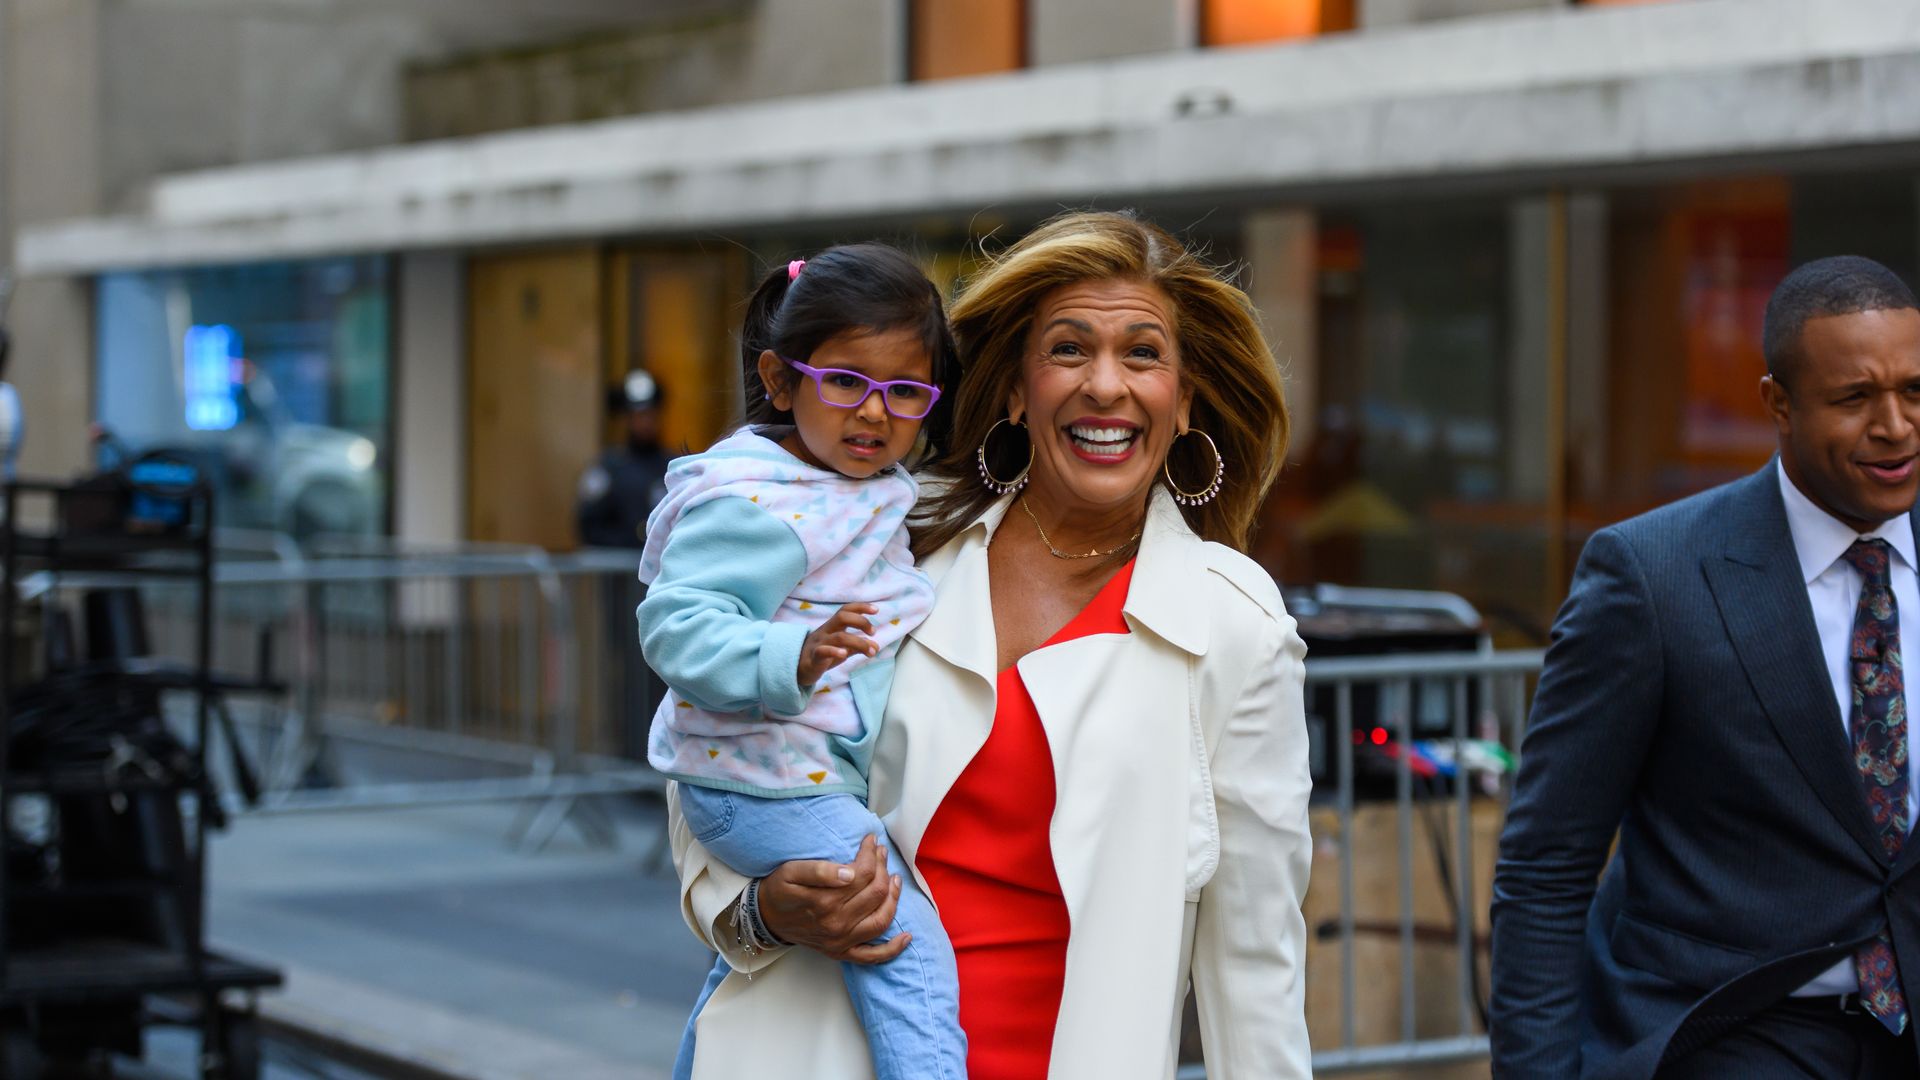 Hoda Kotb and daughter Haley Joy on the Today Show Monday, October 21, 2019